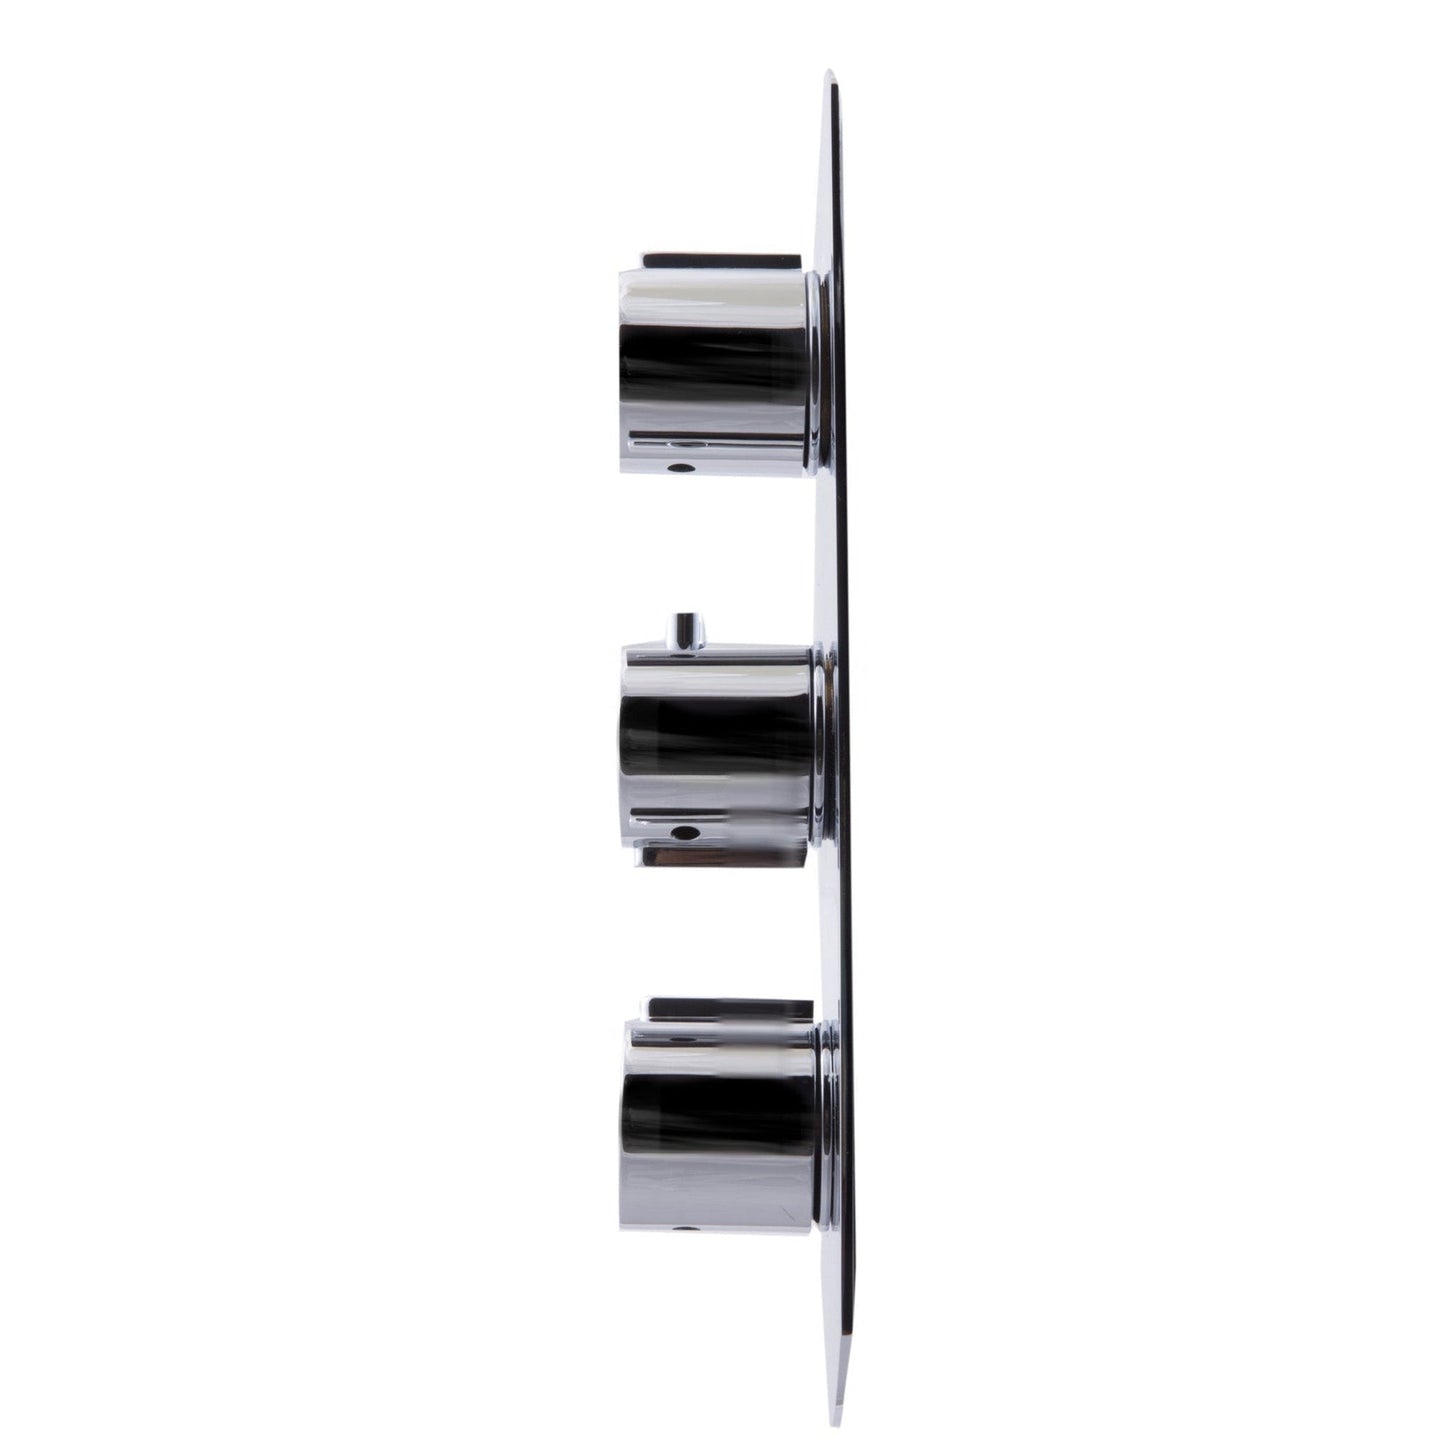 ALFI Brand AB3901-PC Polished Chrome 2 Way Thermostatic Shower Mixer With Round Knobs